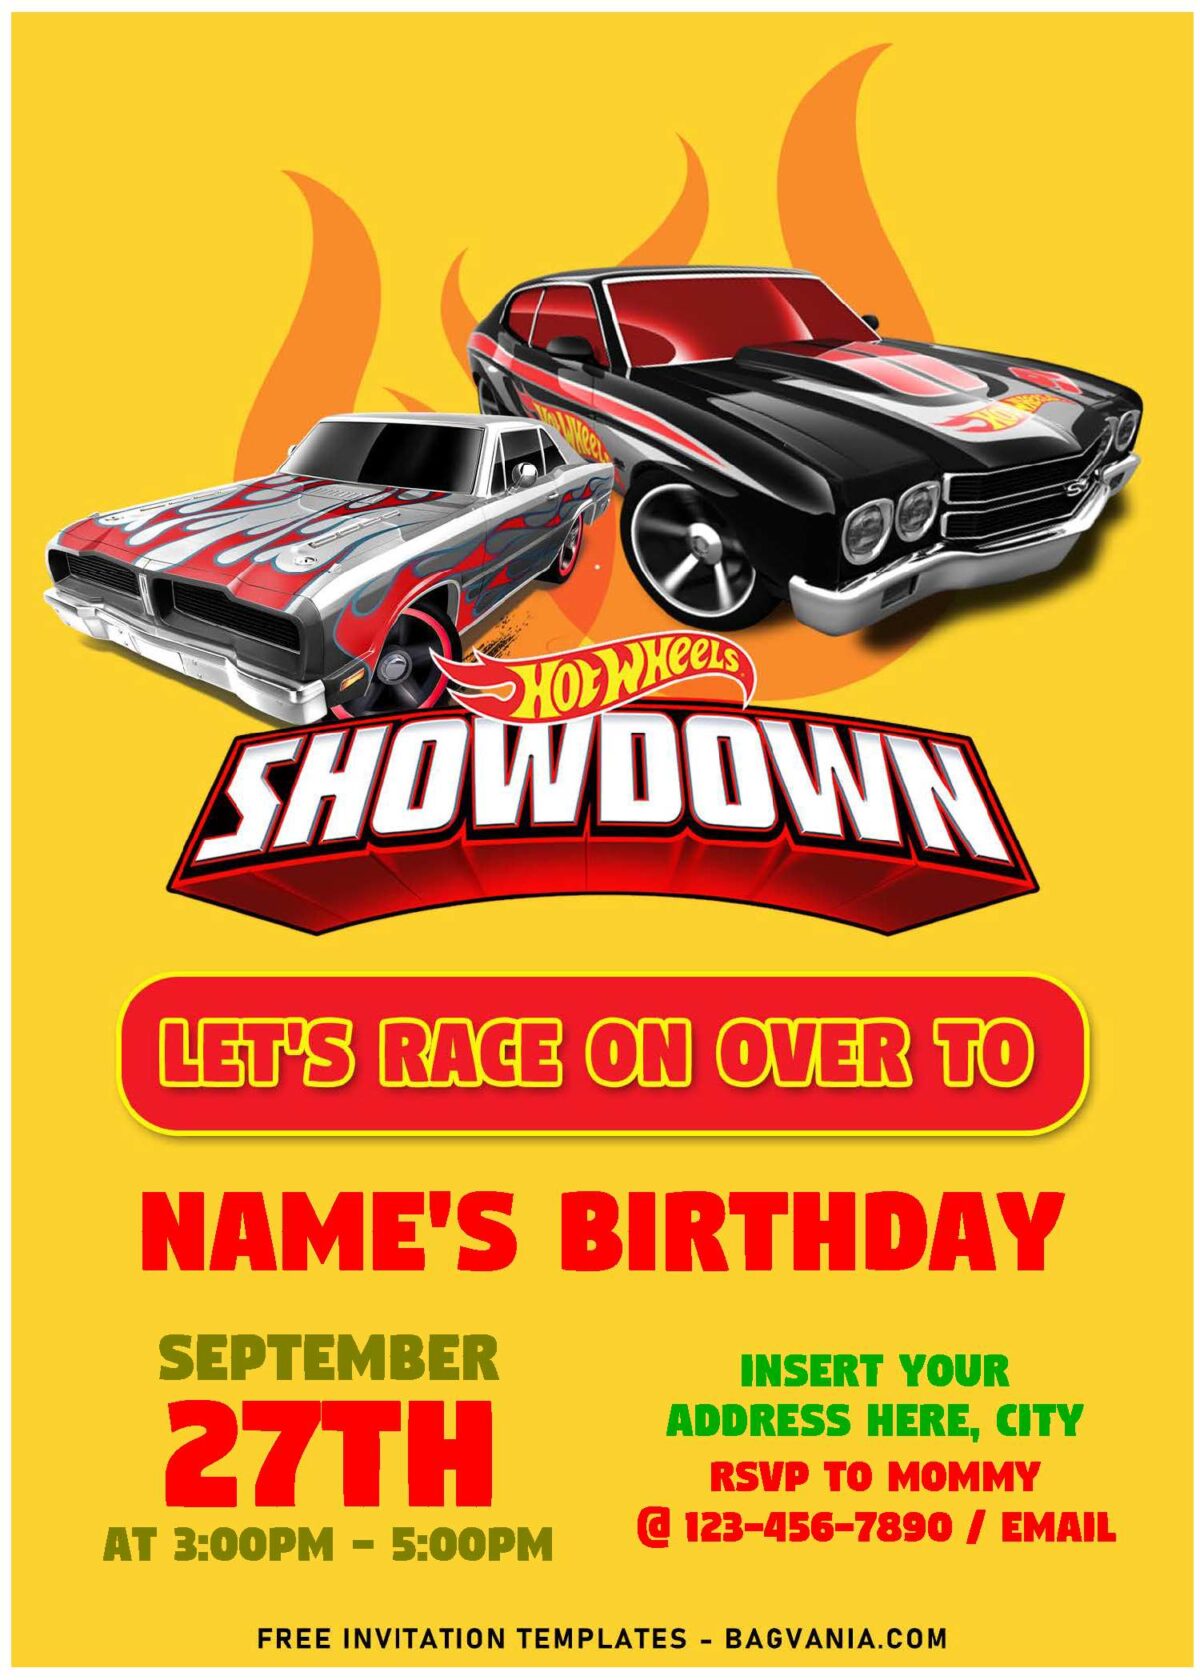 (Free Editable PDF) Race With The Winner Hot Wheels Birthday Invitation Templates with muscle cars